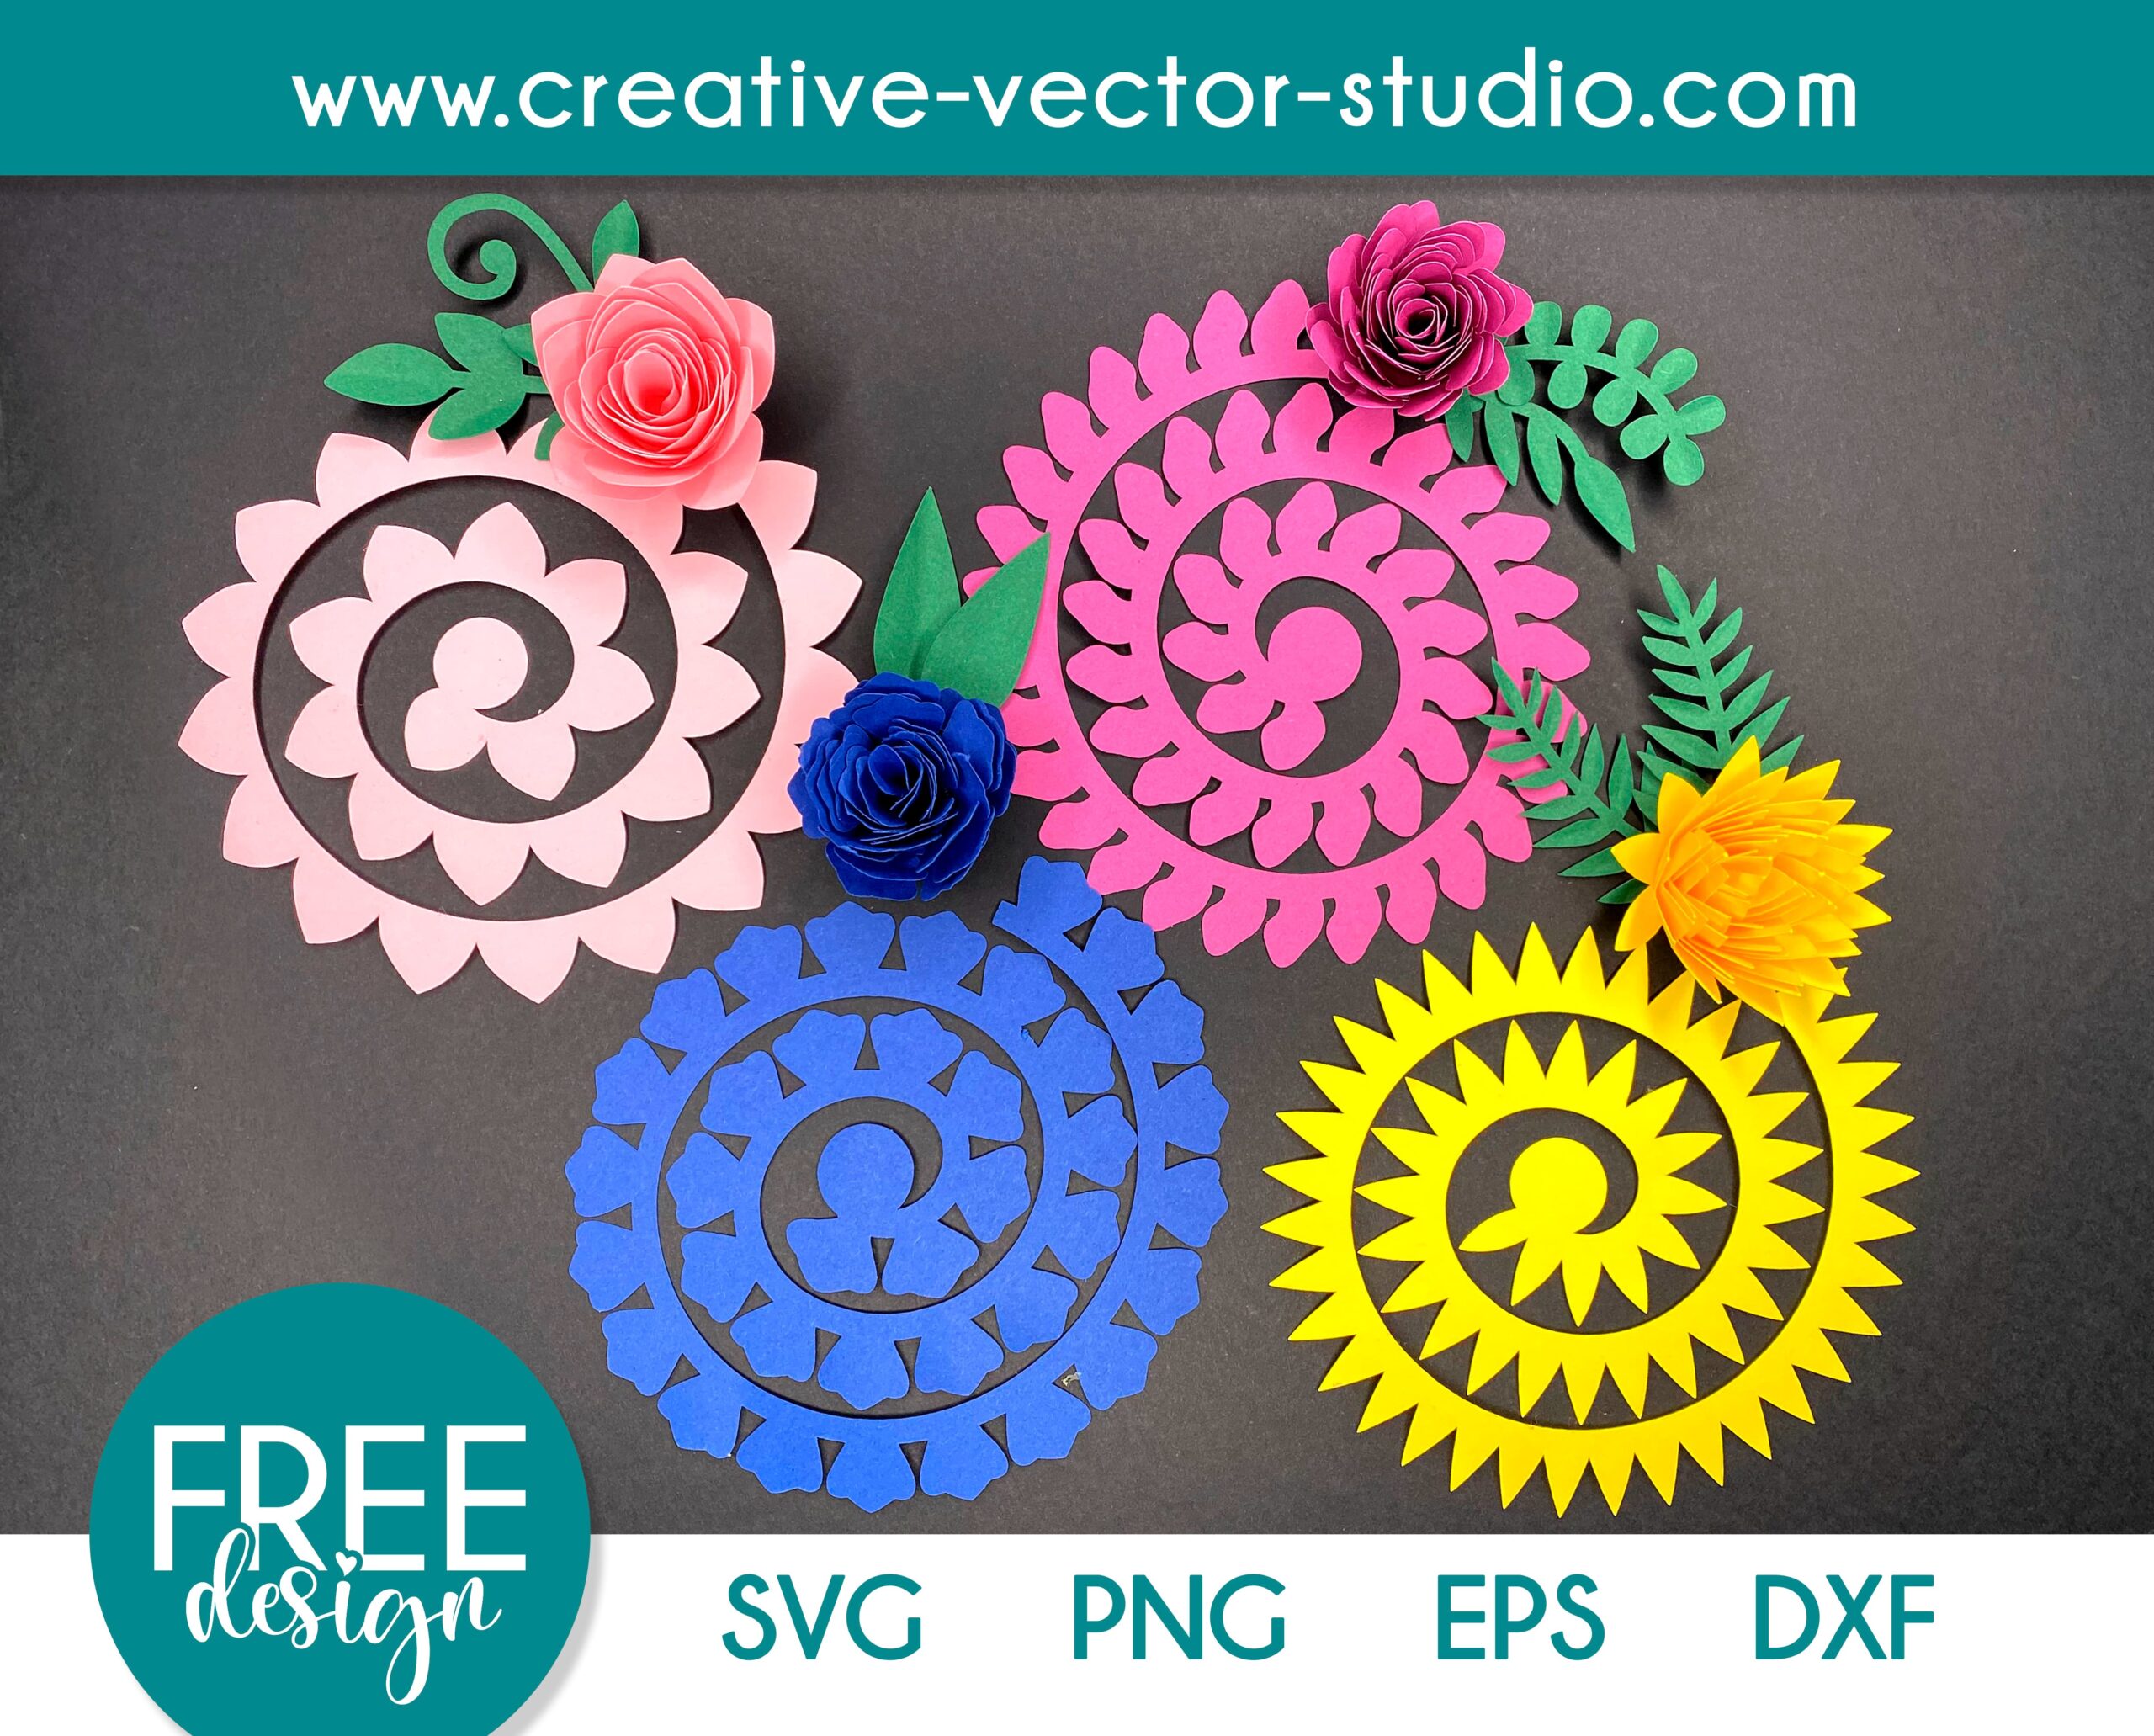 Free Rolled Flower SVG Templates - Creative Vector Studio